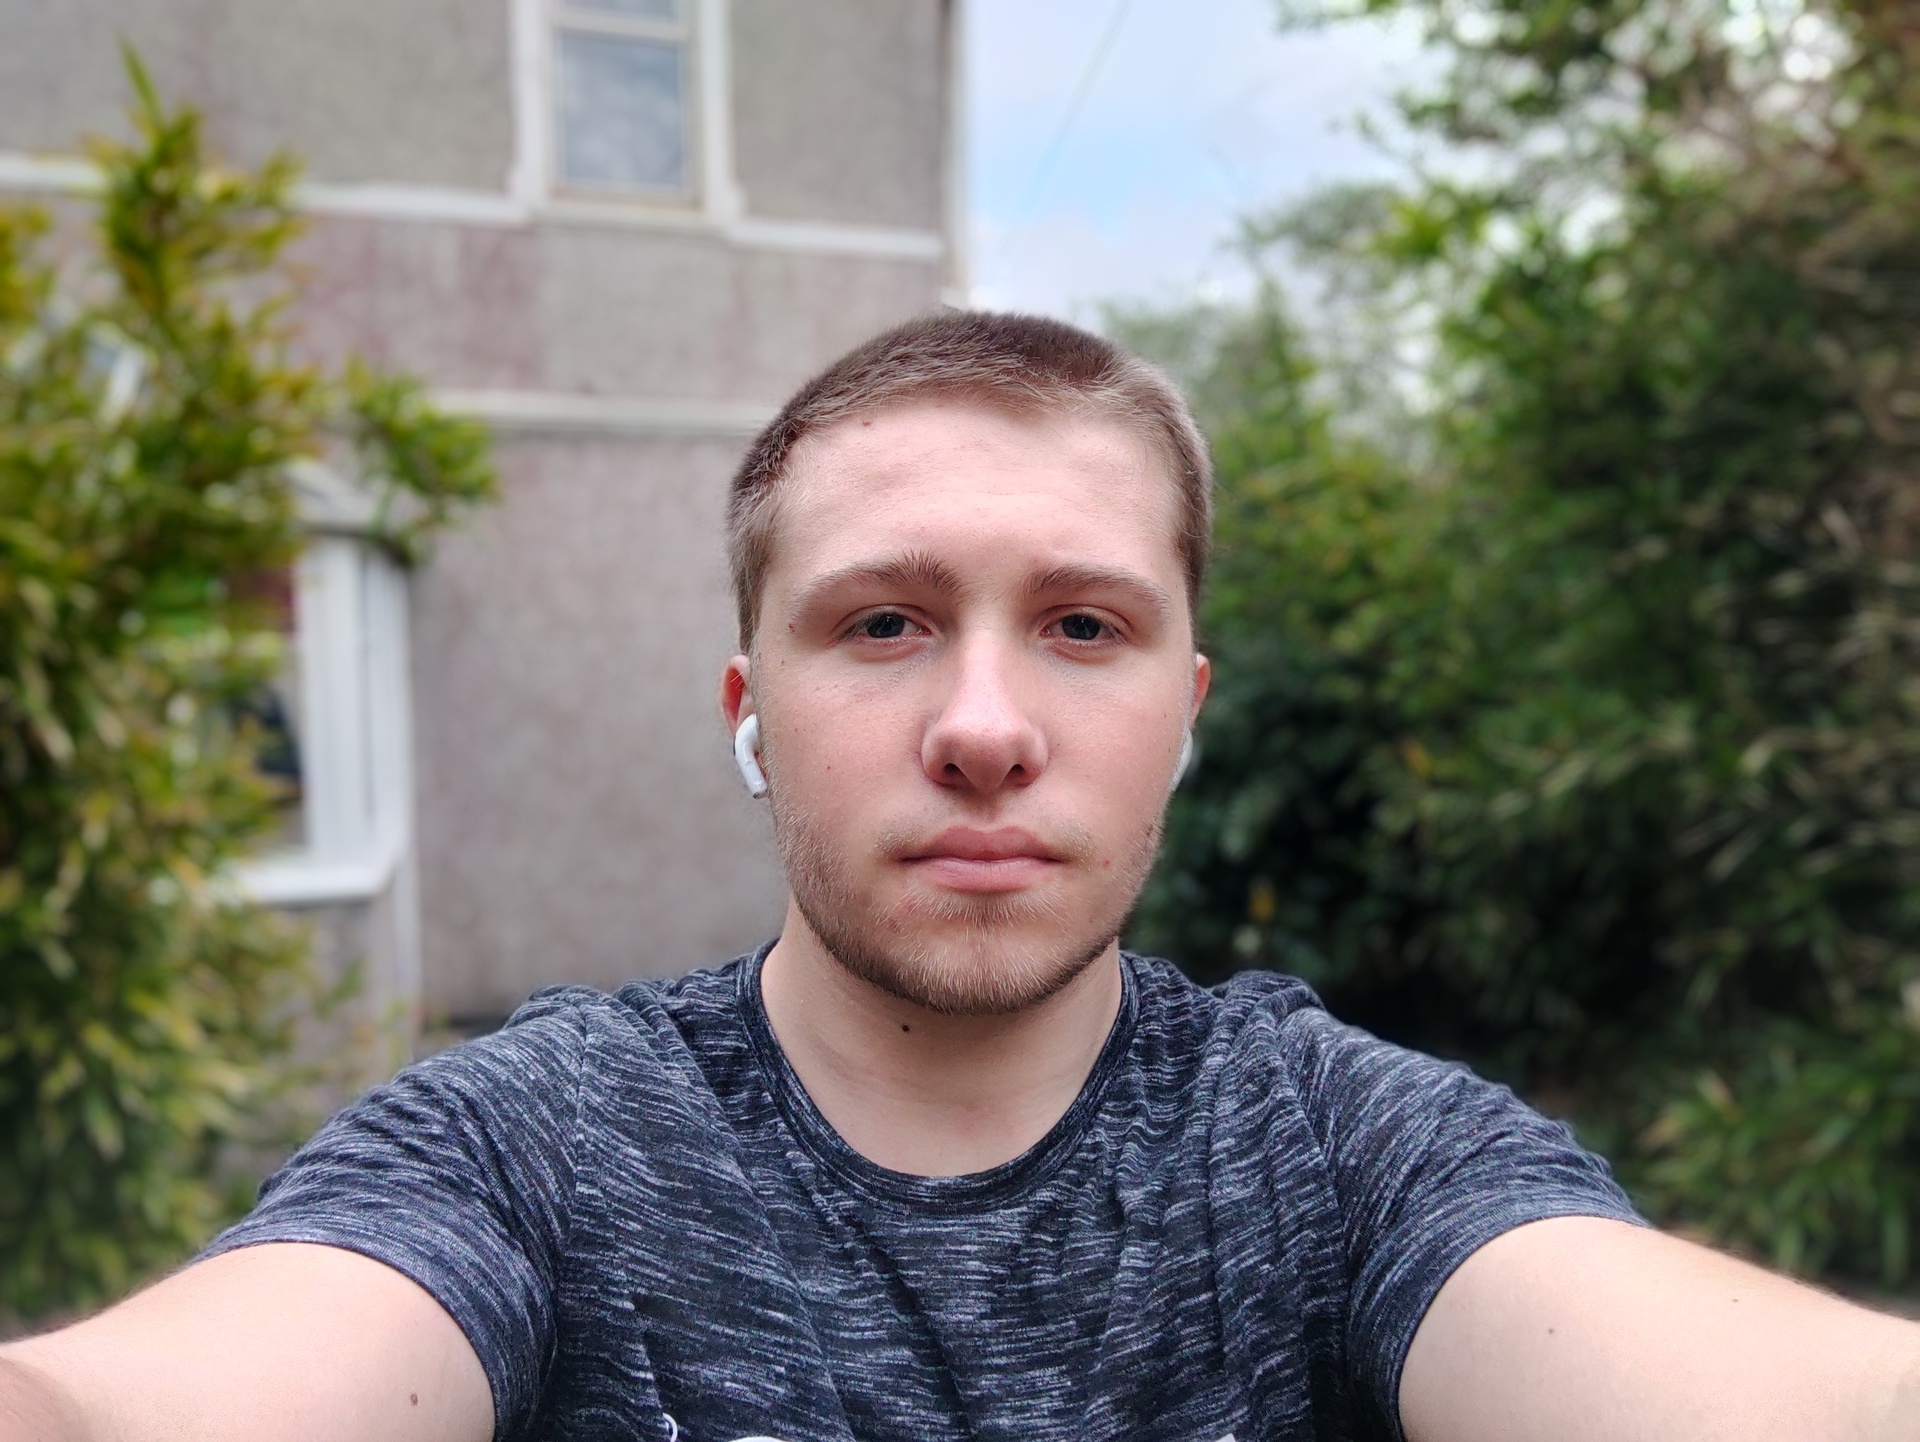 OnePlus Nord test image portait mode selfie in garden with sky behind